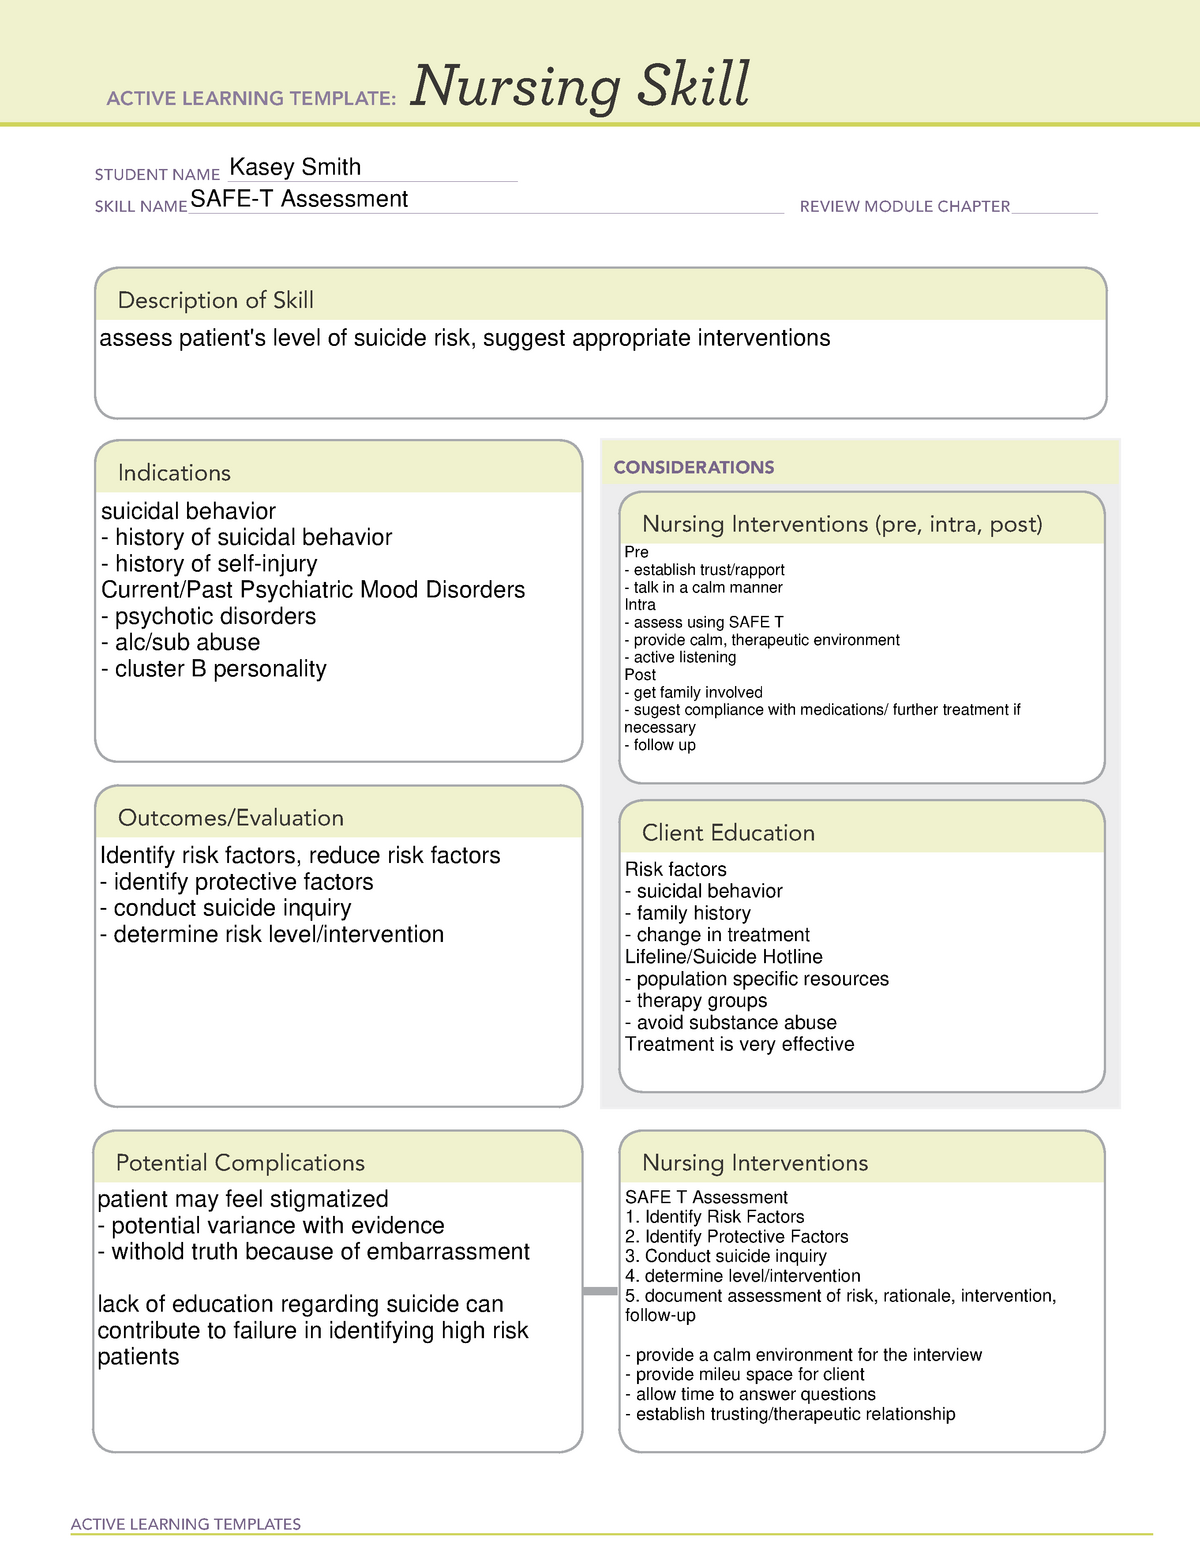 ATI Learning Module SAFET Assessment ACTIVE LEARNING TEMPLATES